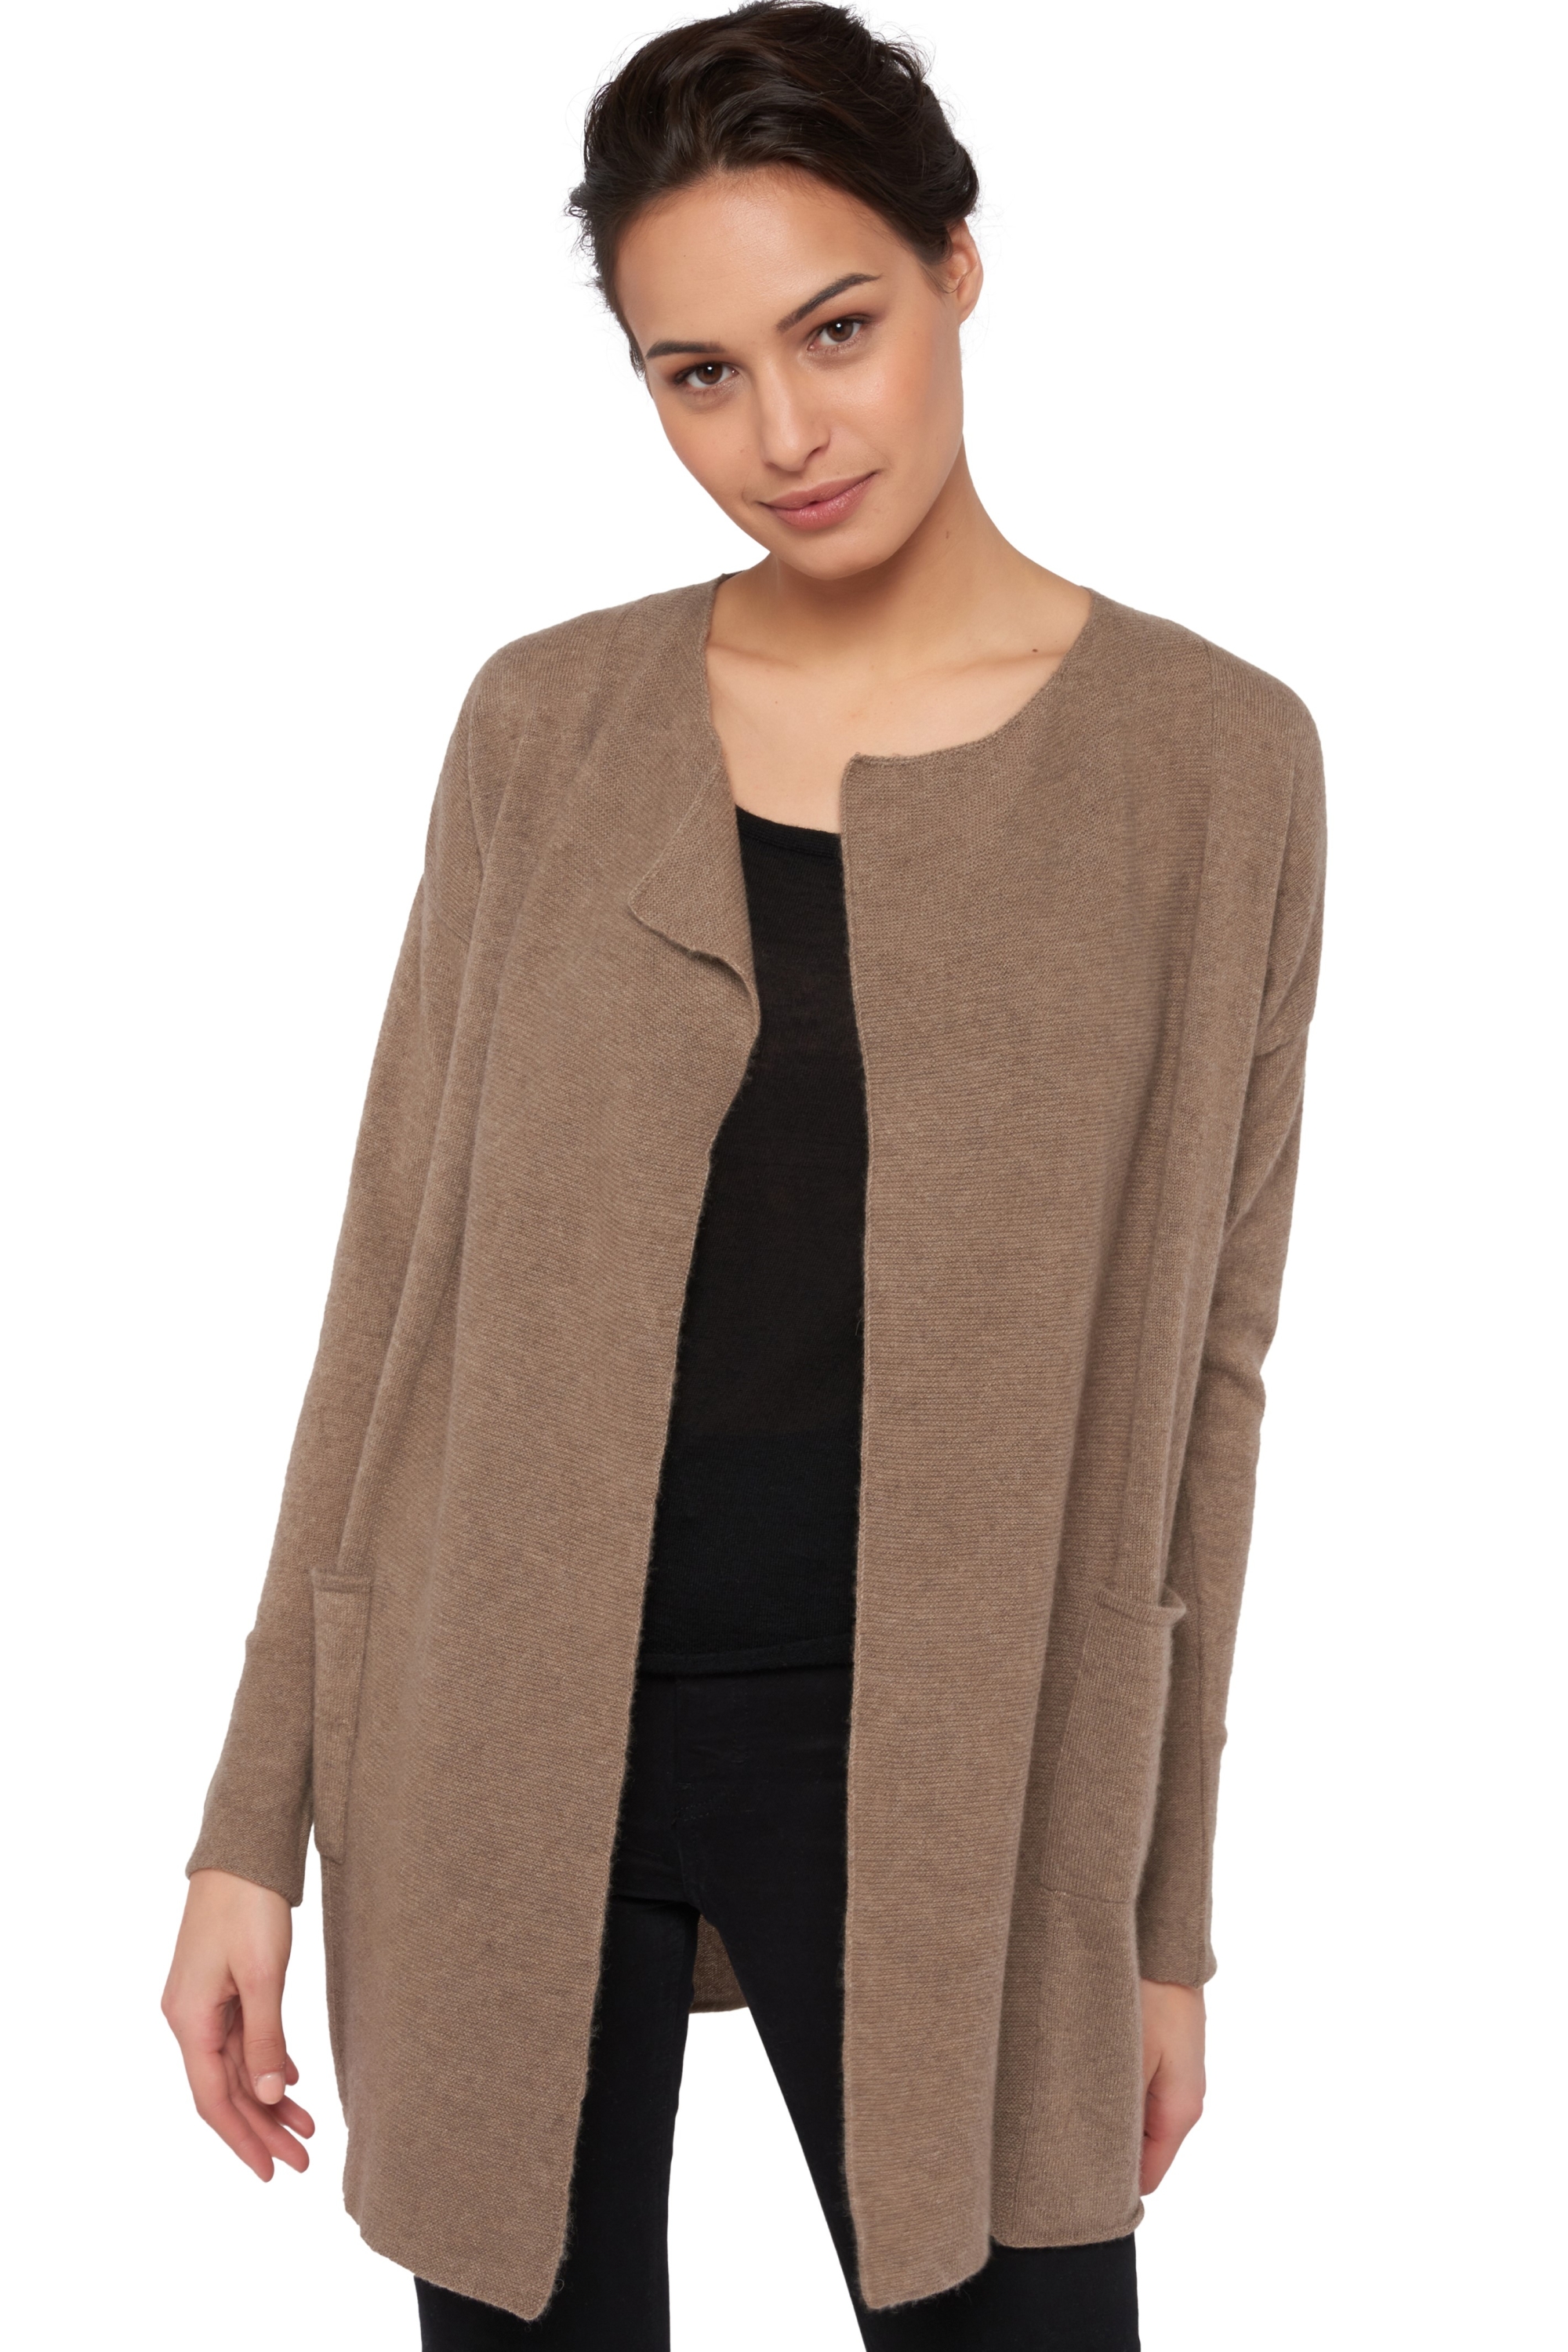 Cachemire pull femme soldes uele natural brown s